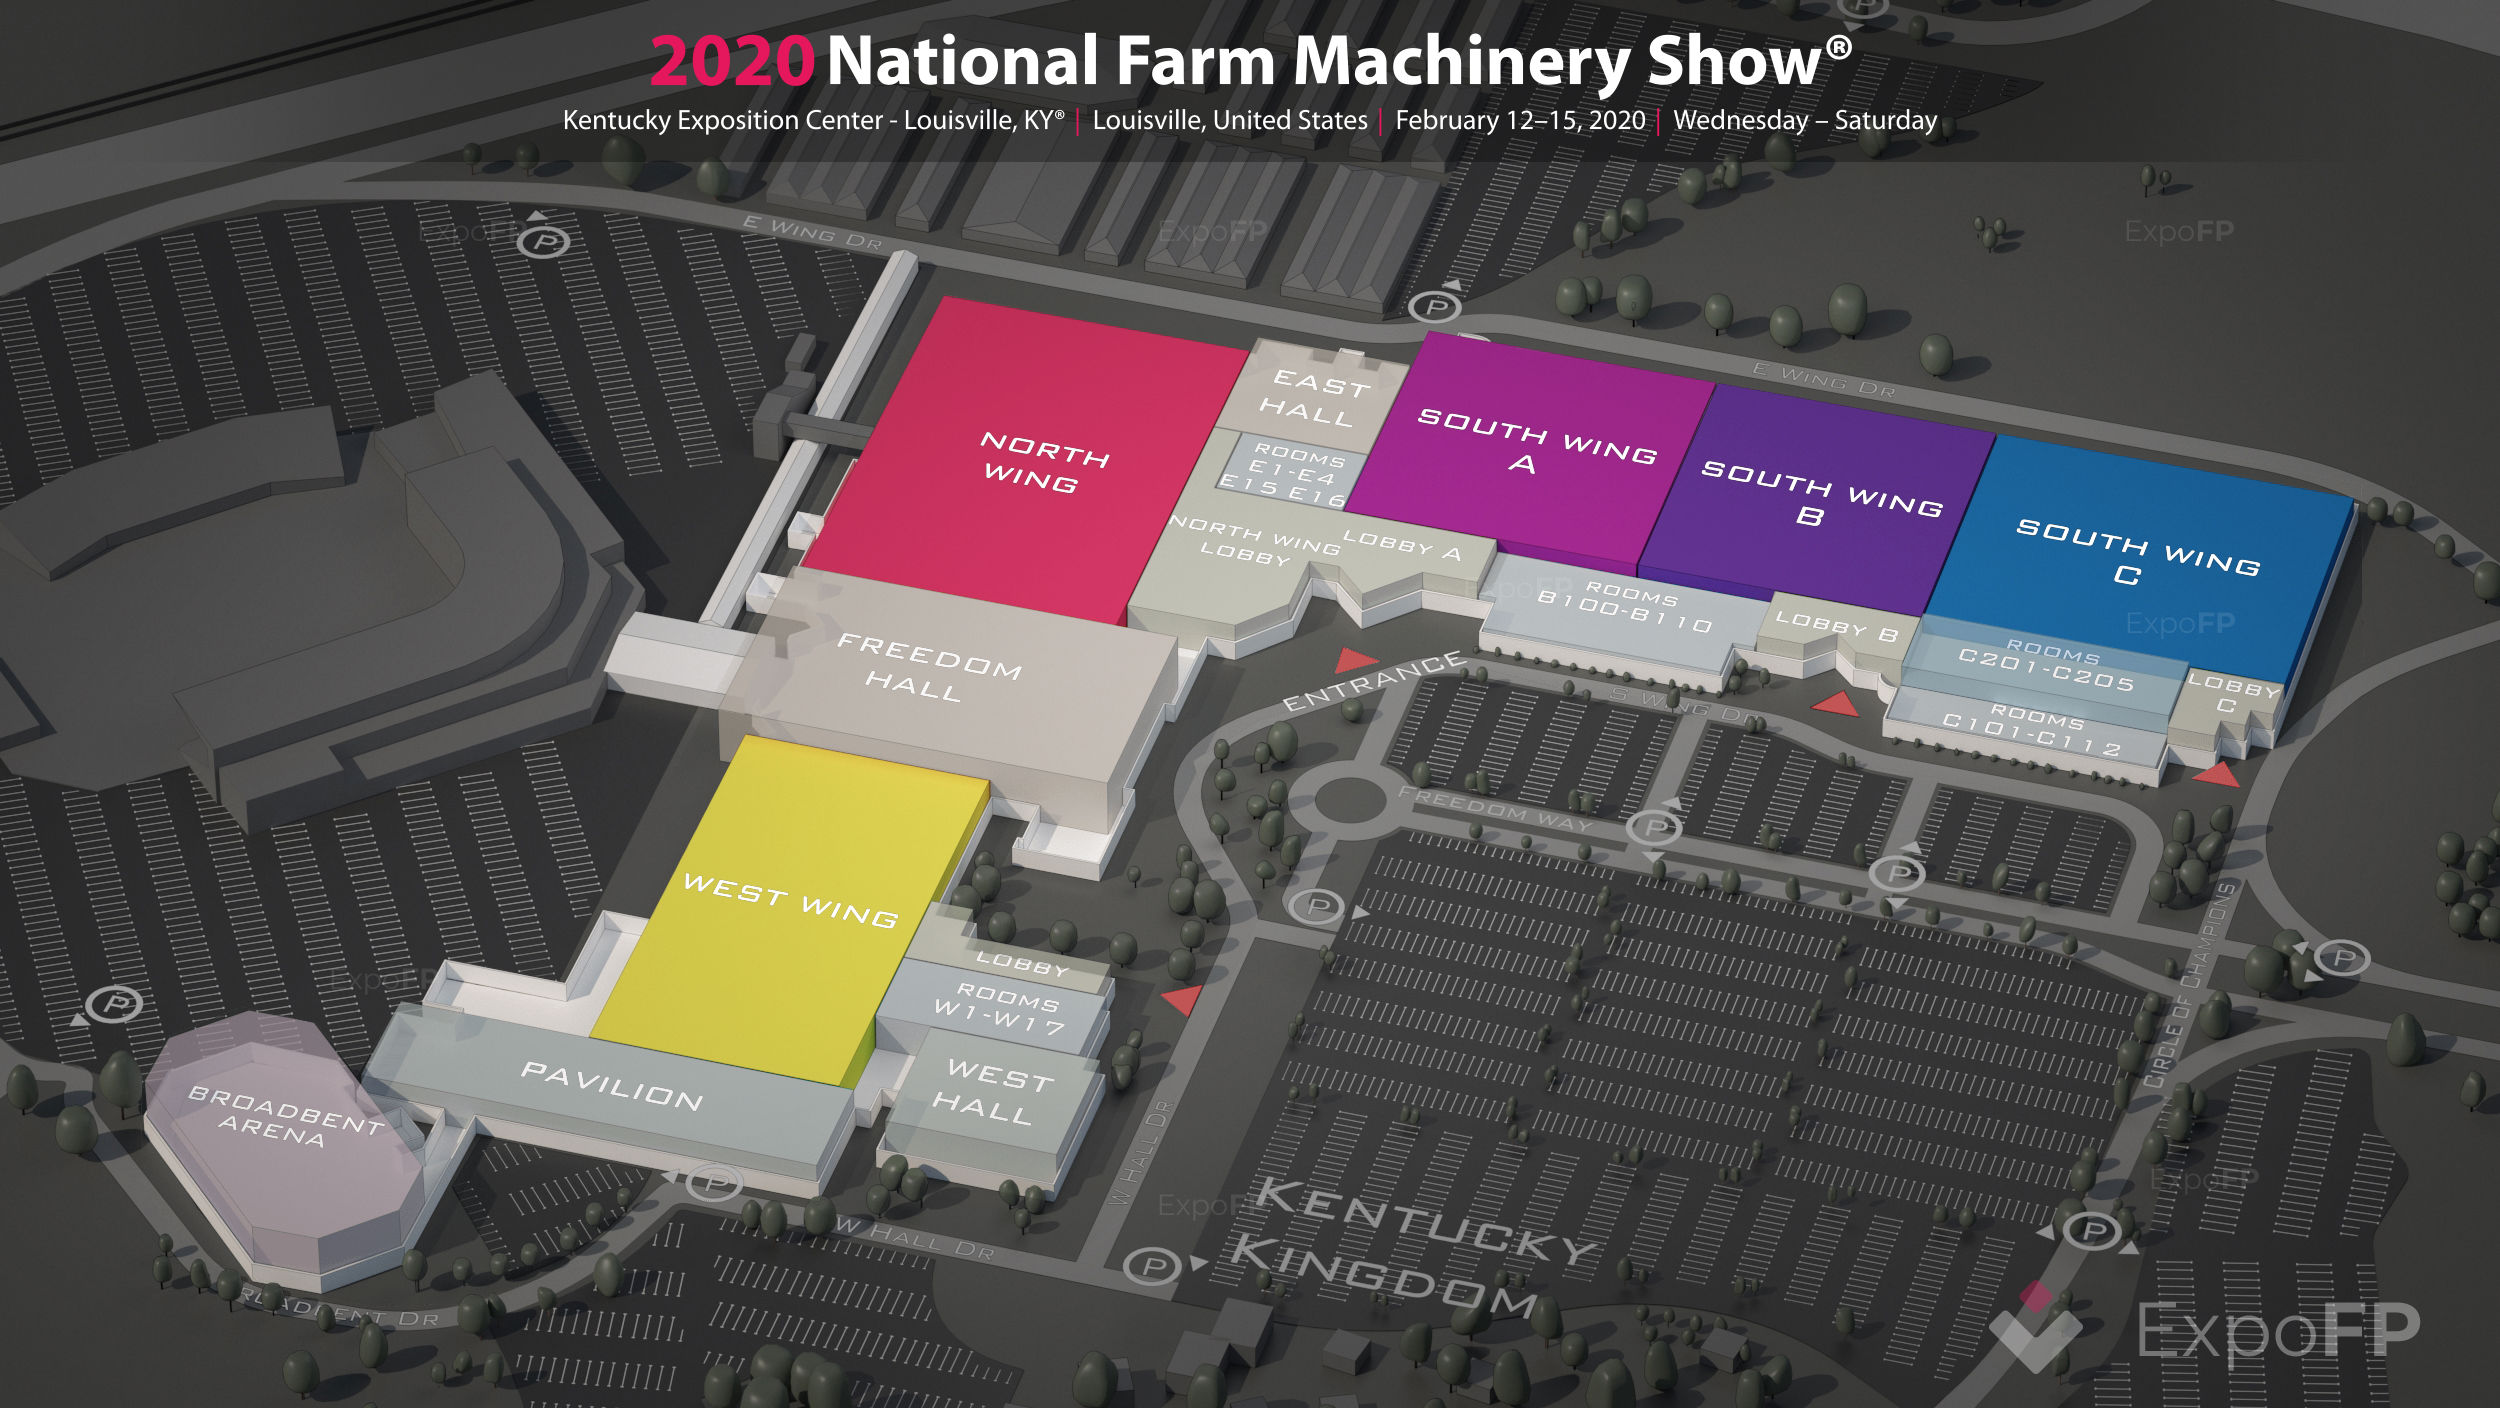 National Farm Machinery Show 2020 in Kentucky Exposition